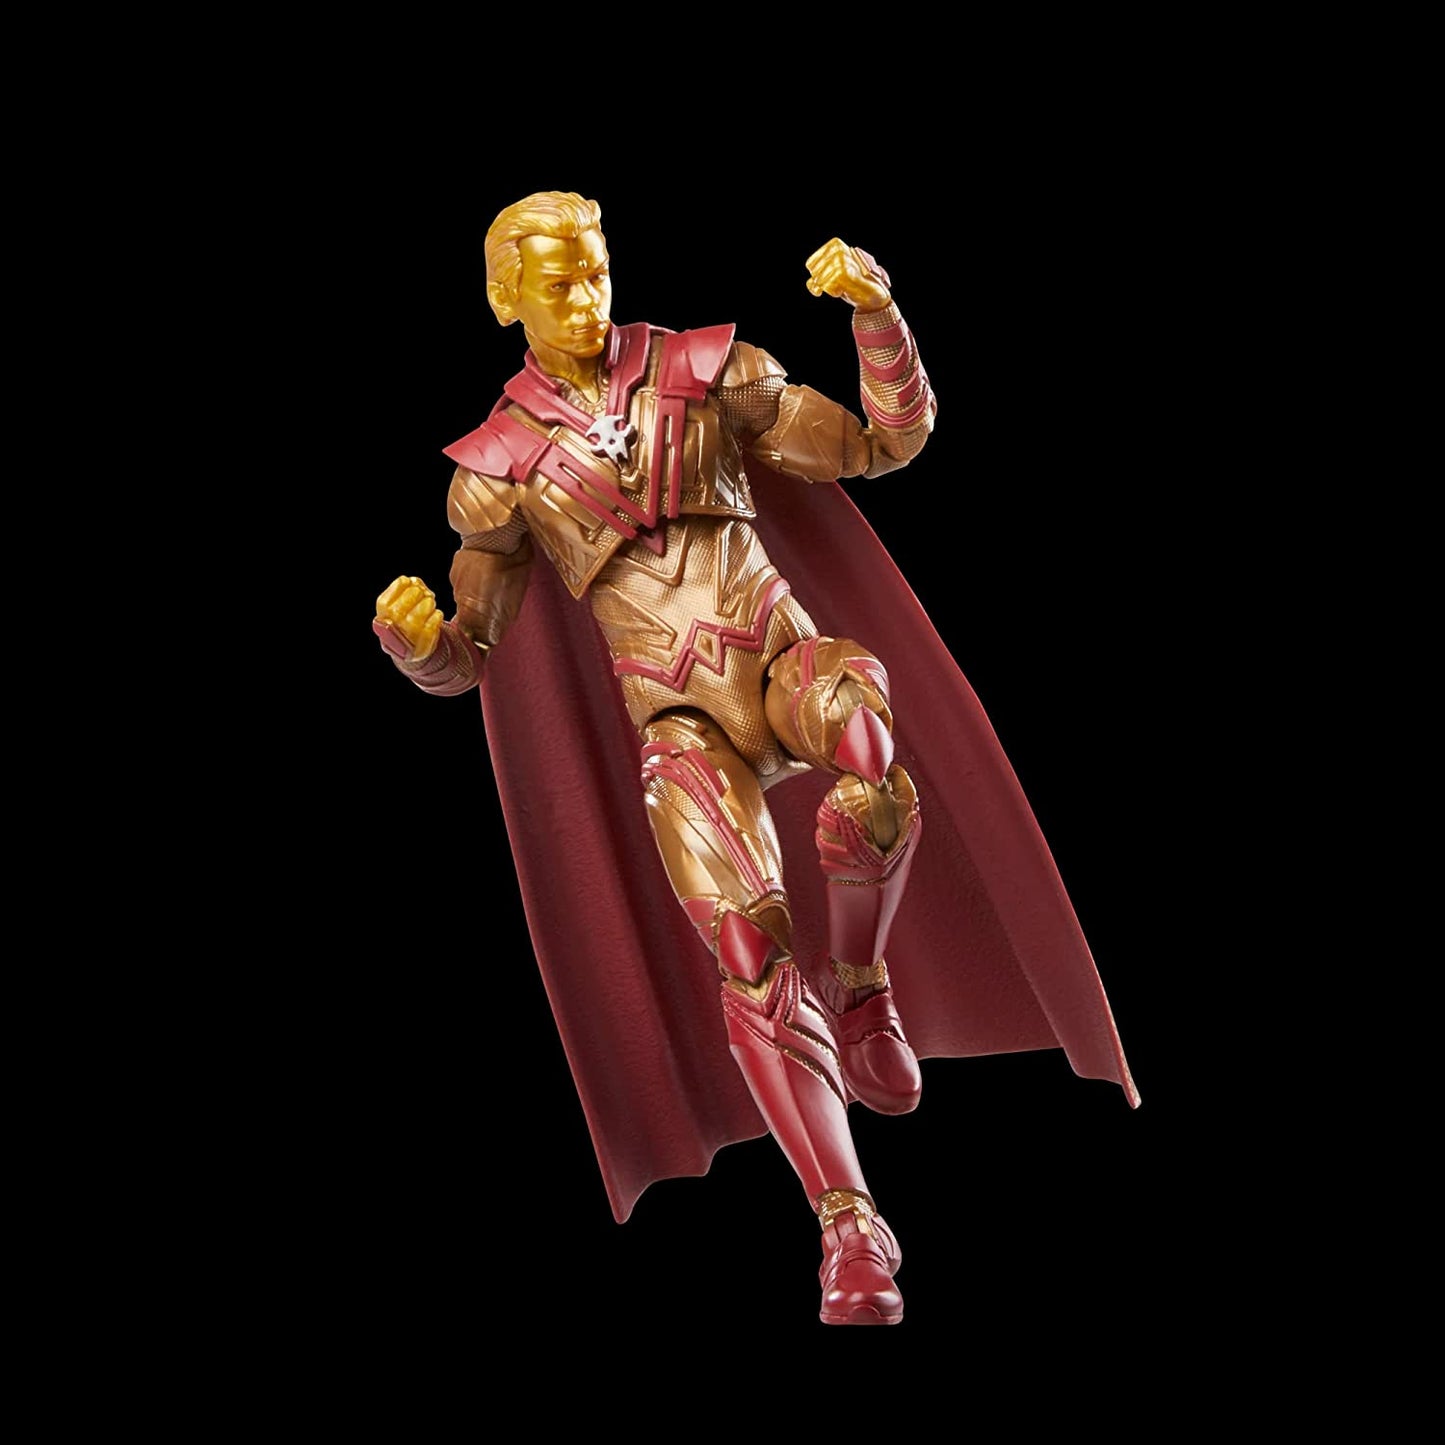  Guardians of the Galaxy Vol. 3 Marvel Legends Adam Warlock 6-Inch Action Figure Toy - Heretoserveyou